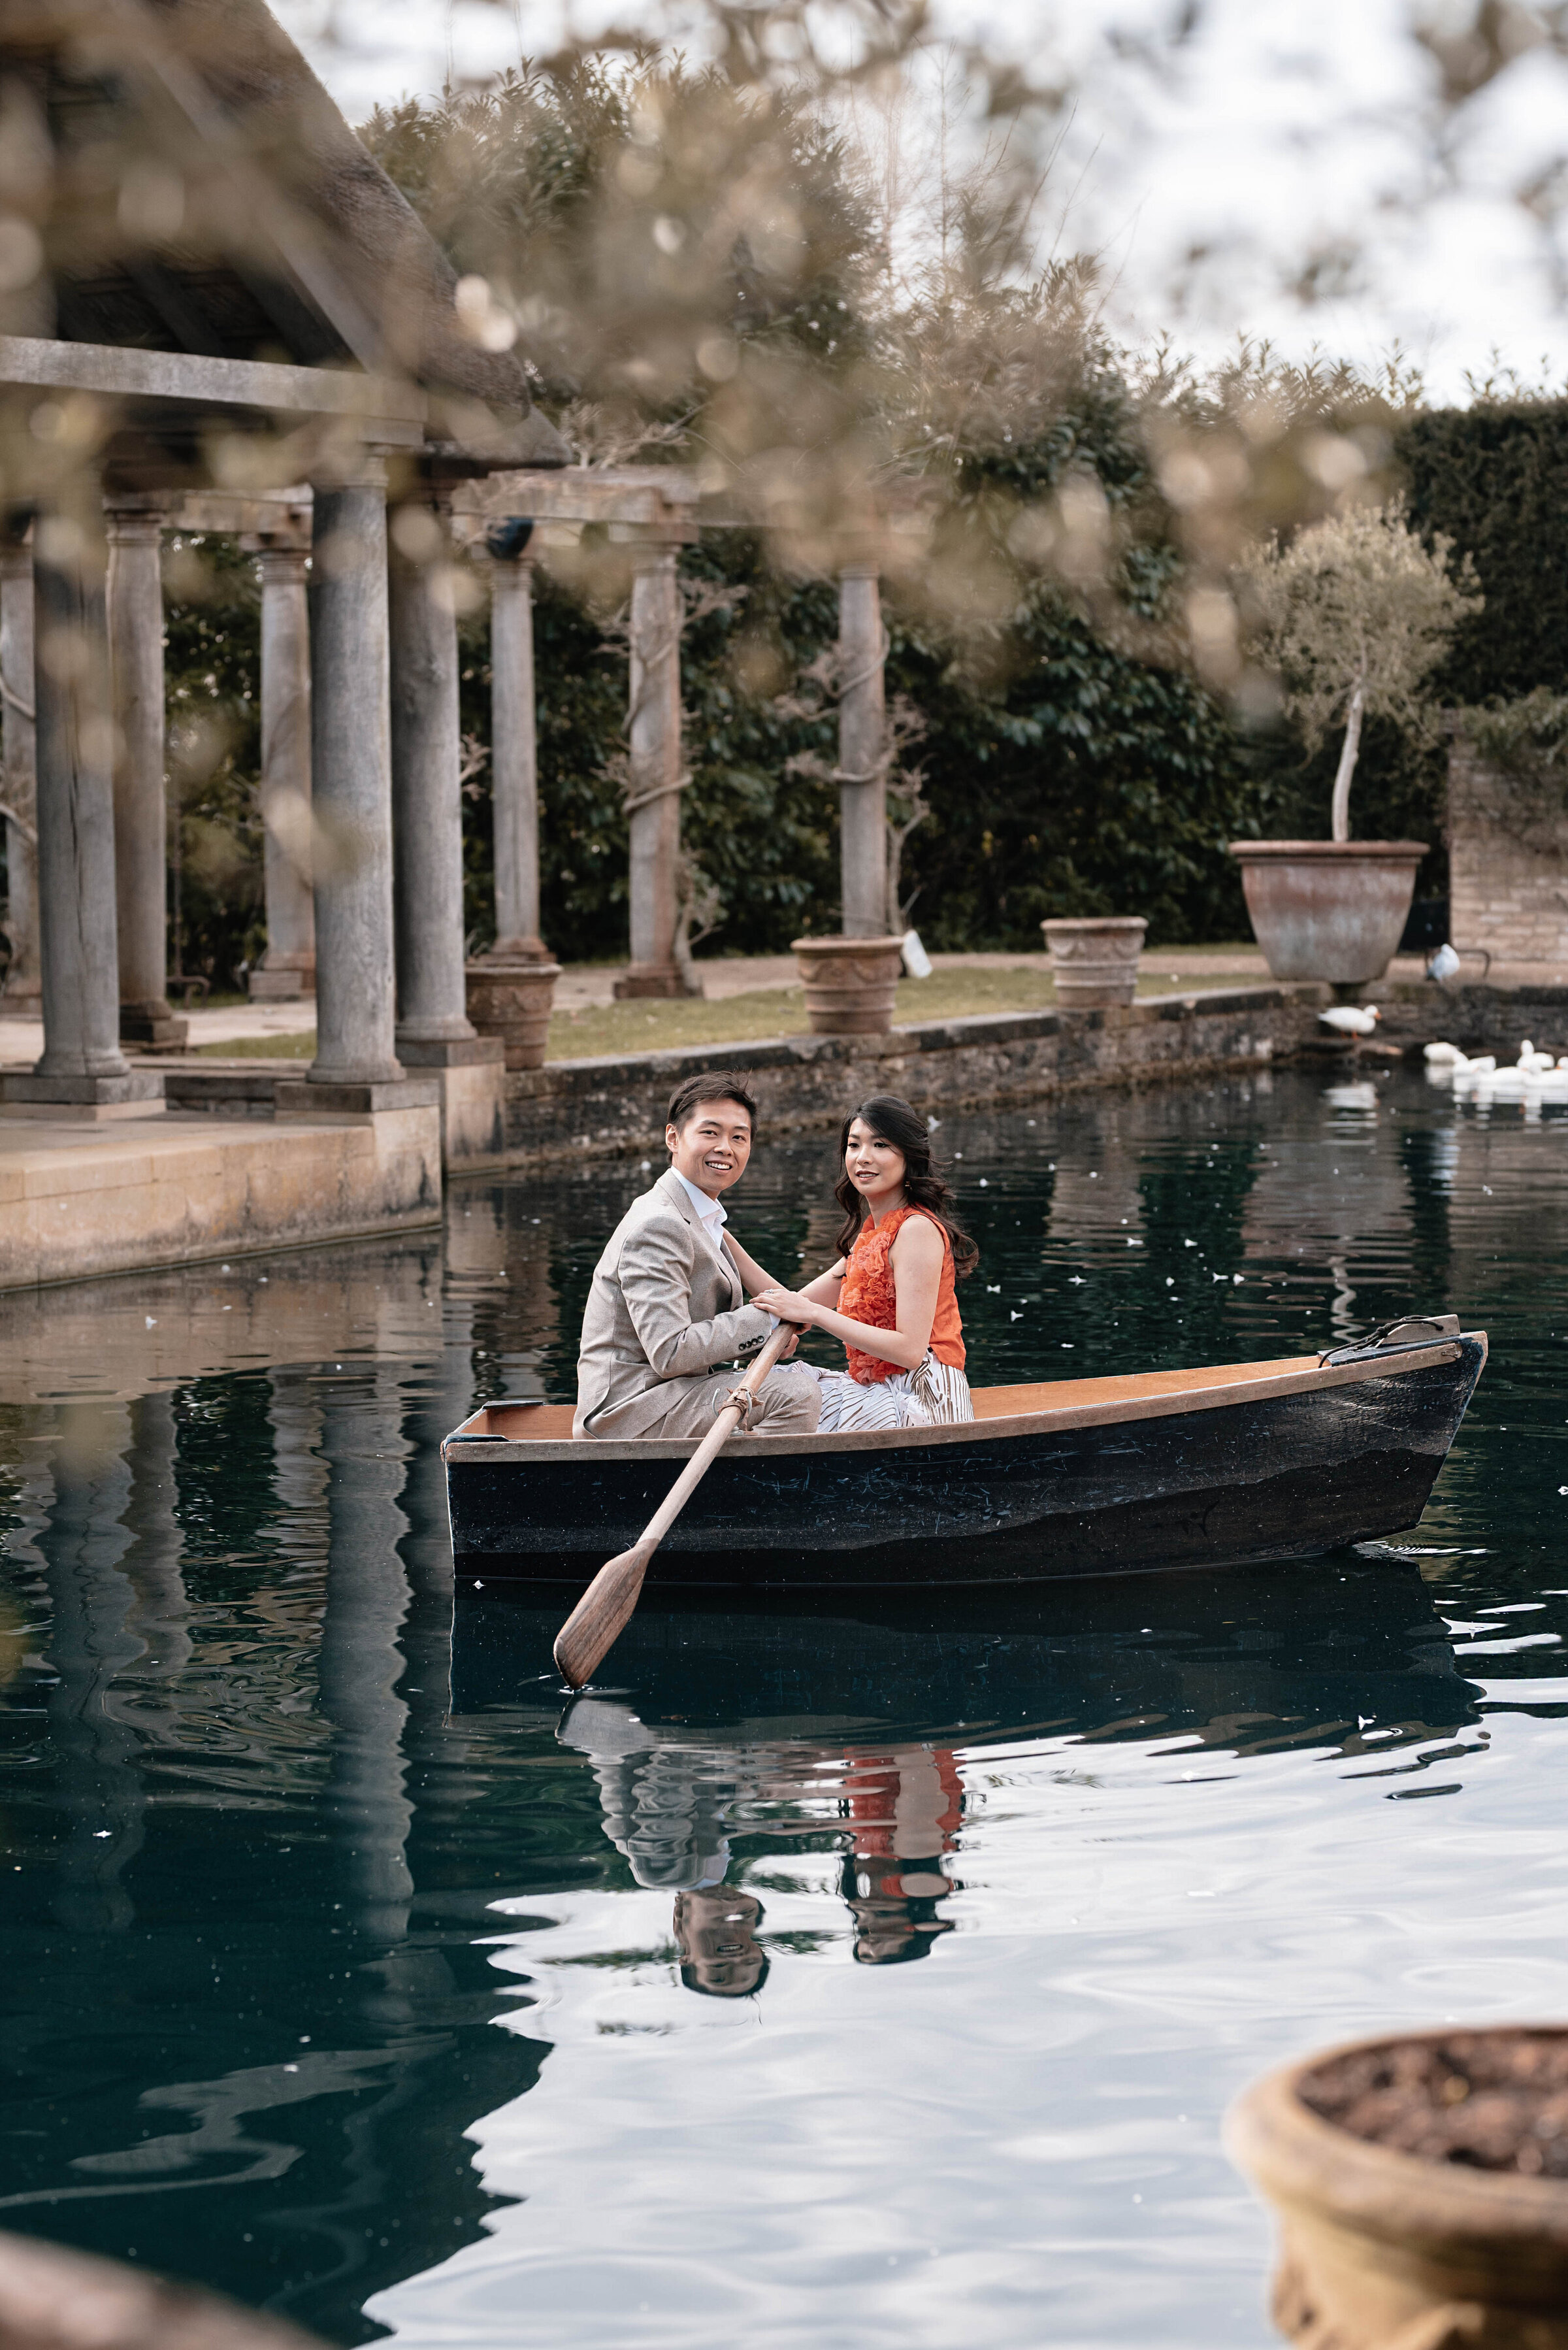 Man and woman on a small rowing boat in the middle of the pond at Euridge Manor wedding venue, smiling at the camera